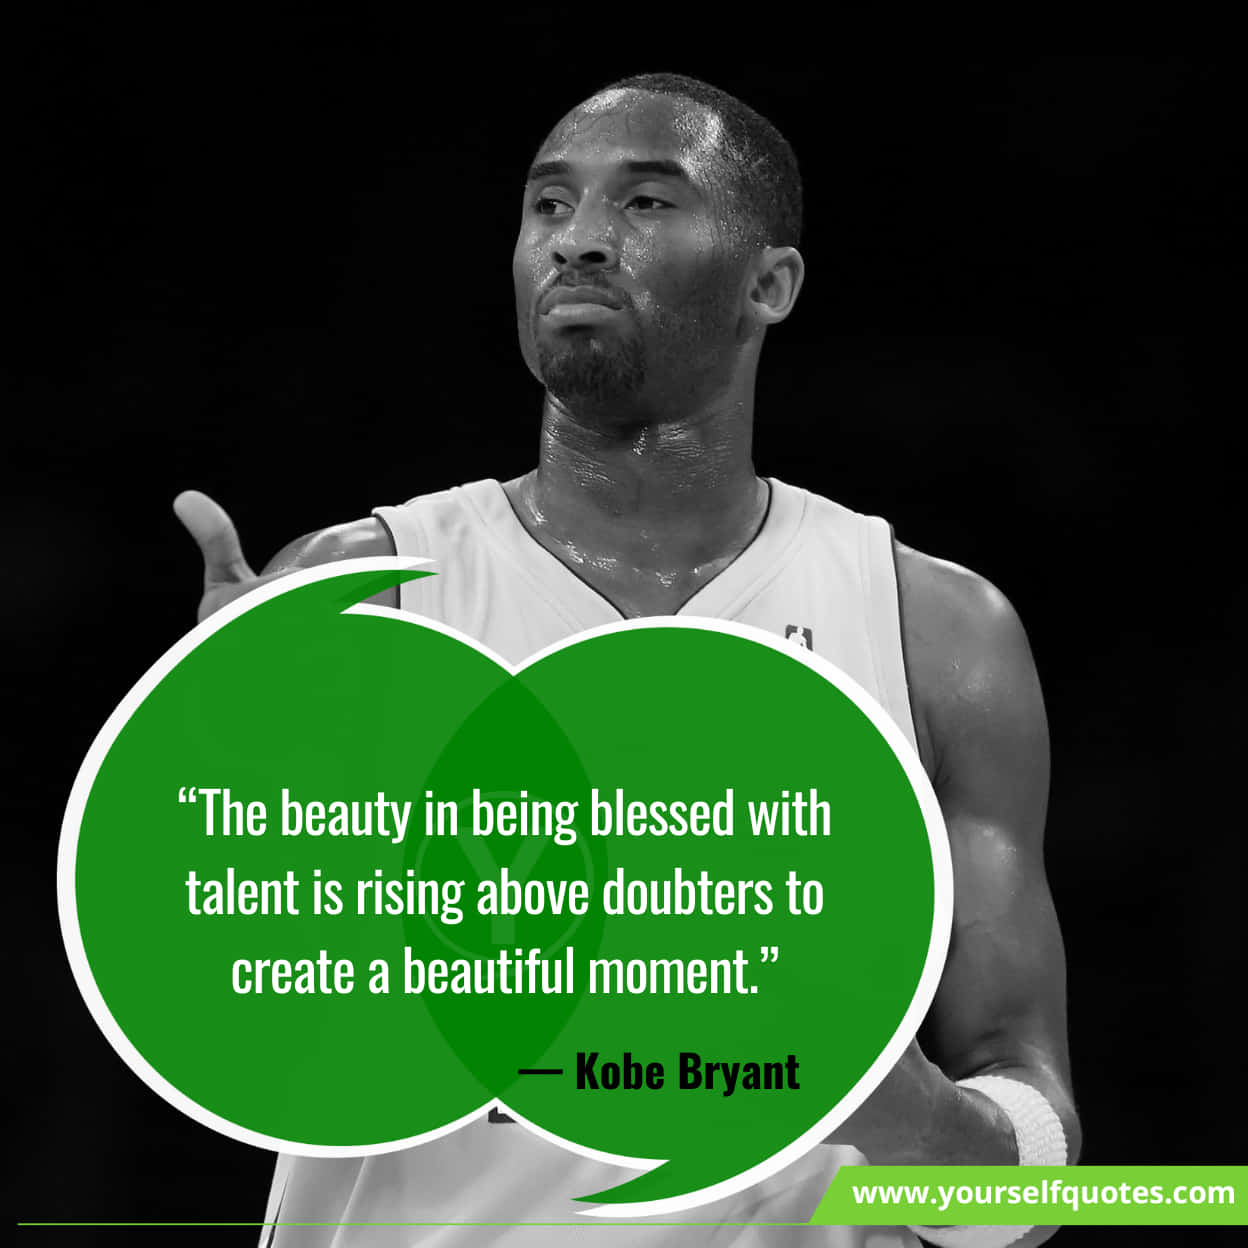 Kobe Bryant Quotes For Best Basketball